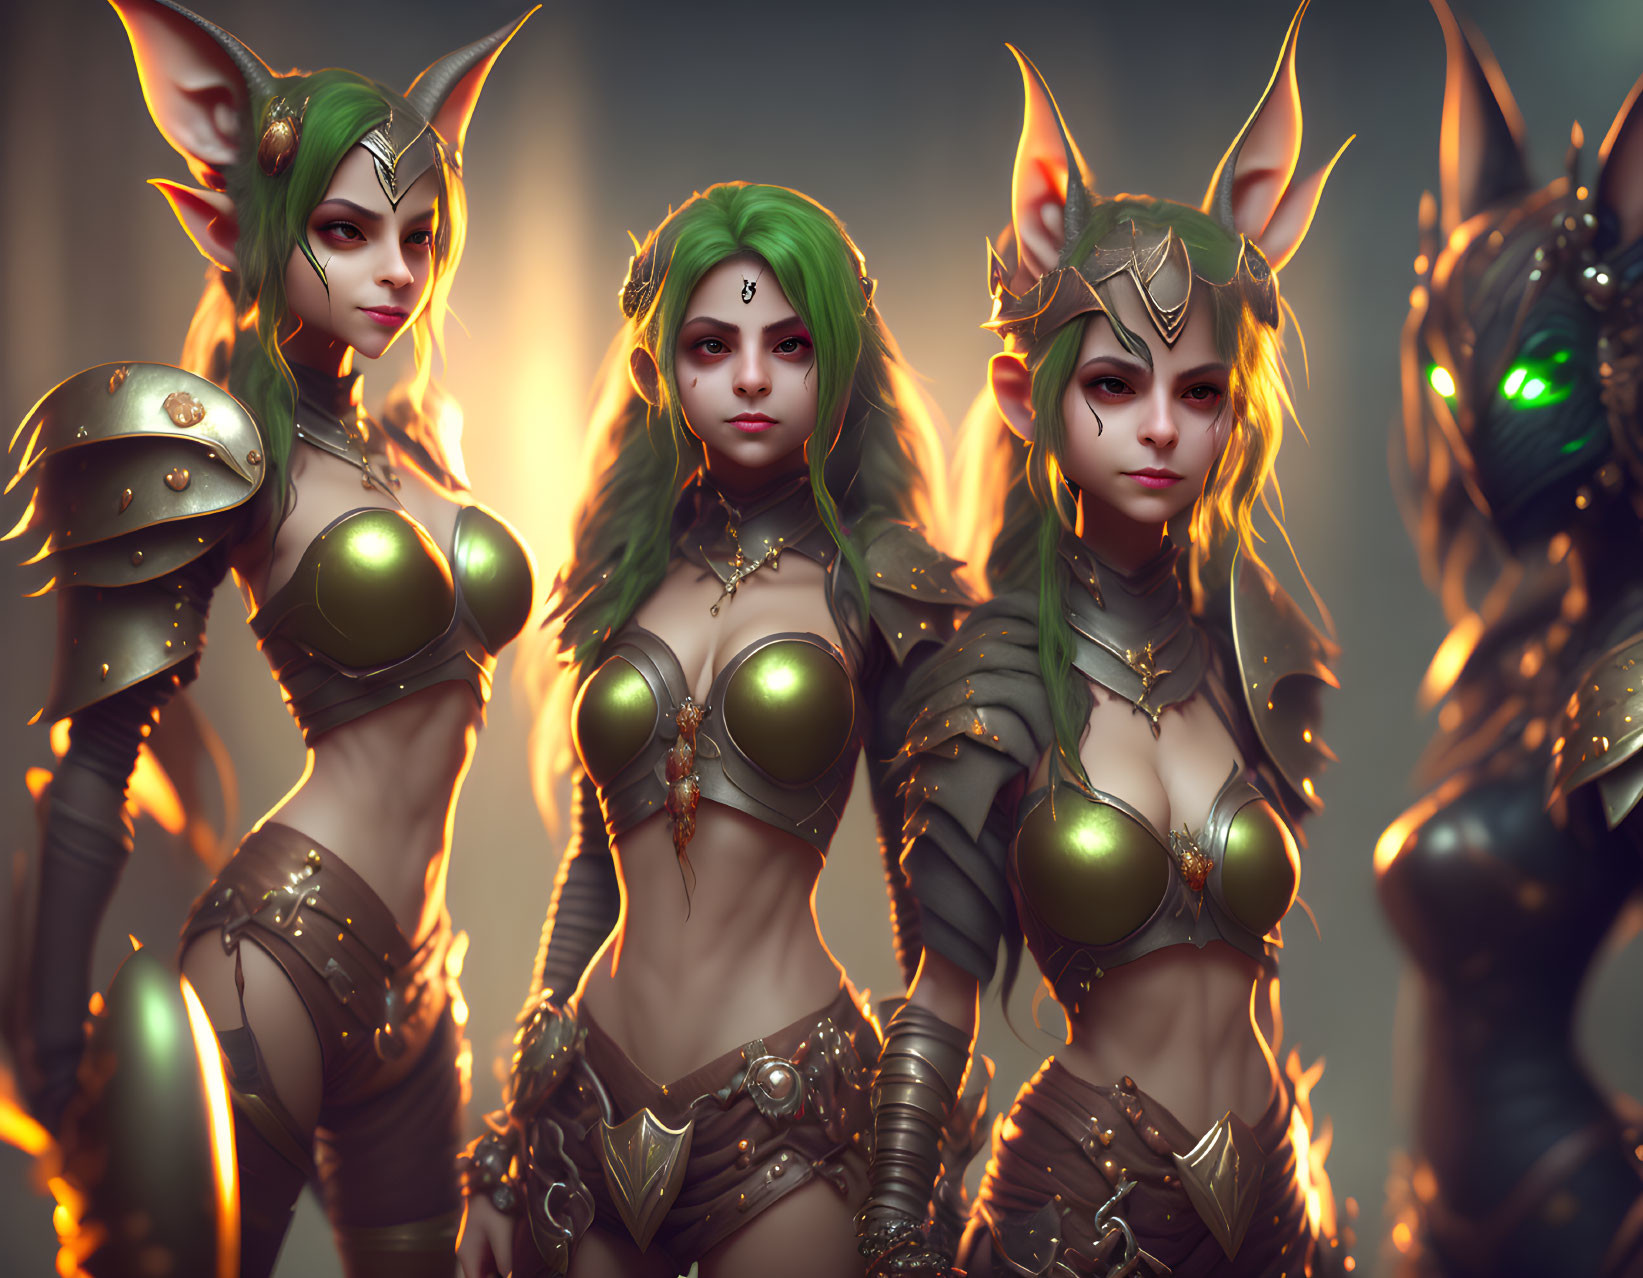 Four fantasy elf warriors in unique armor and ear shapes pose confidently in warm light